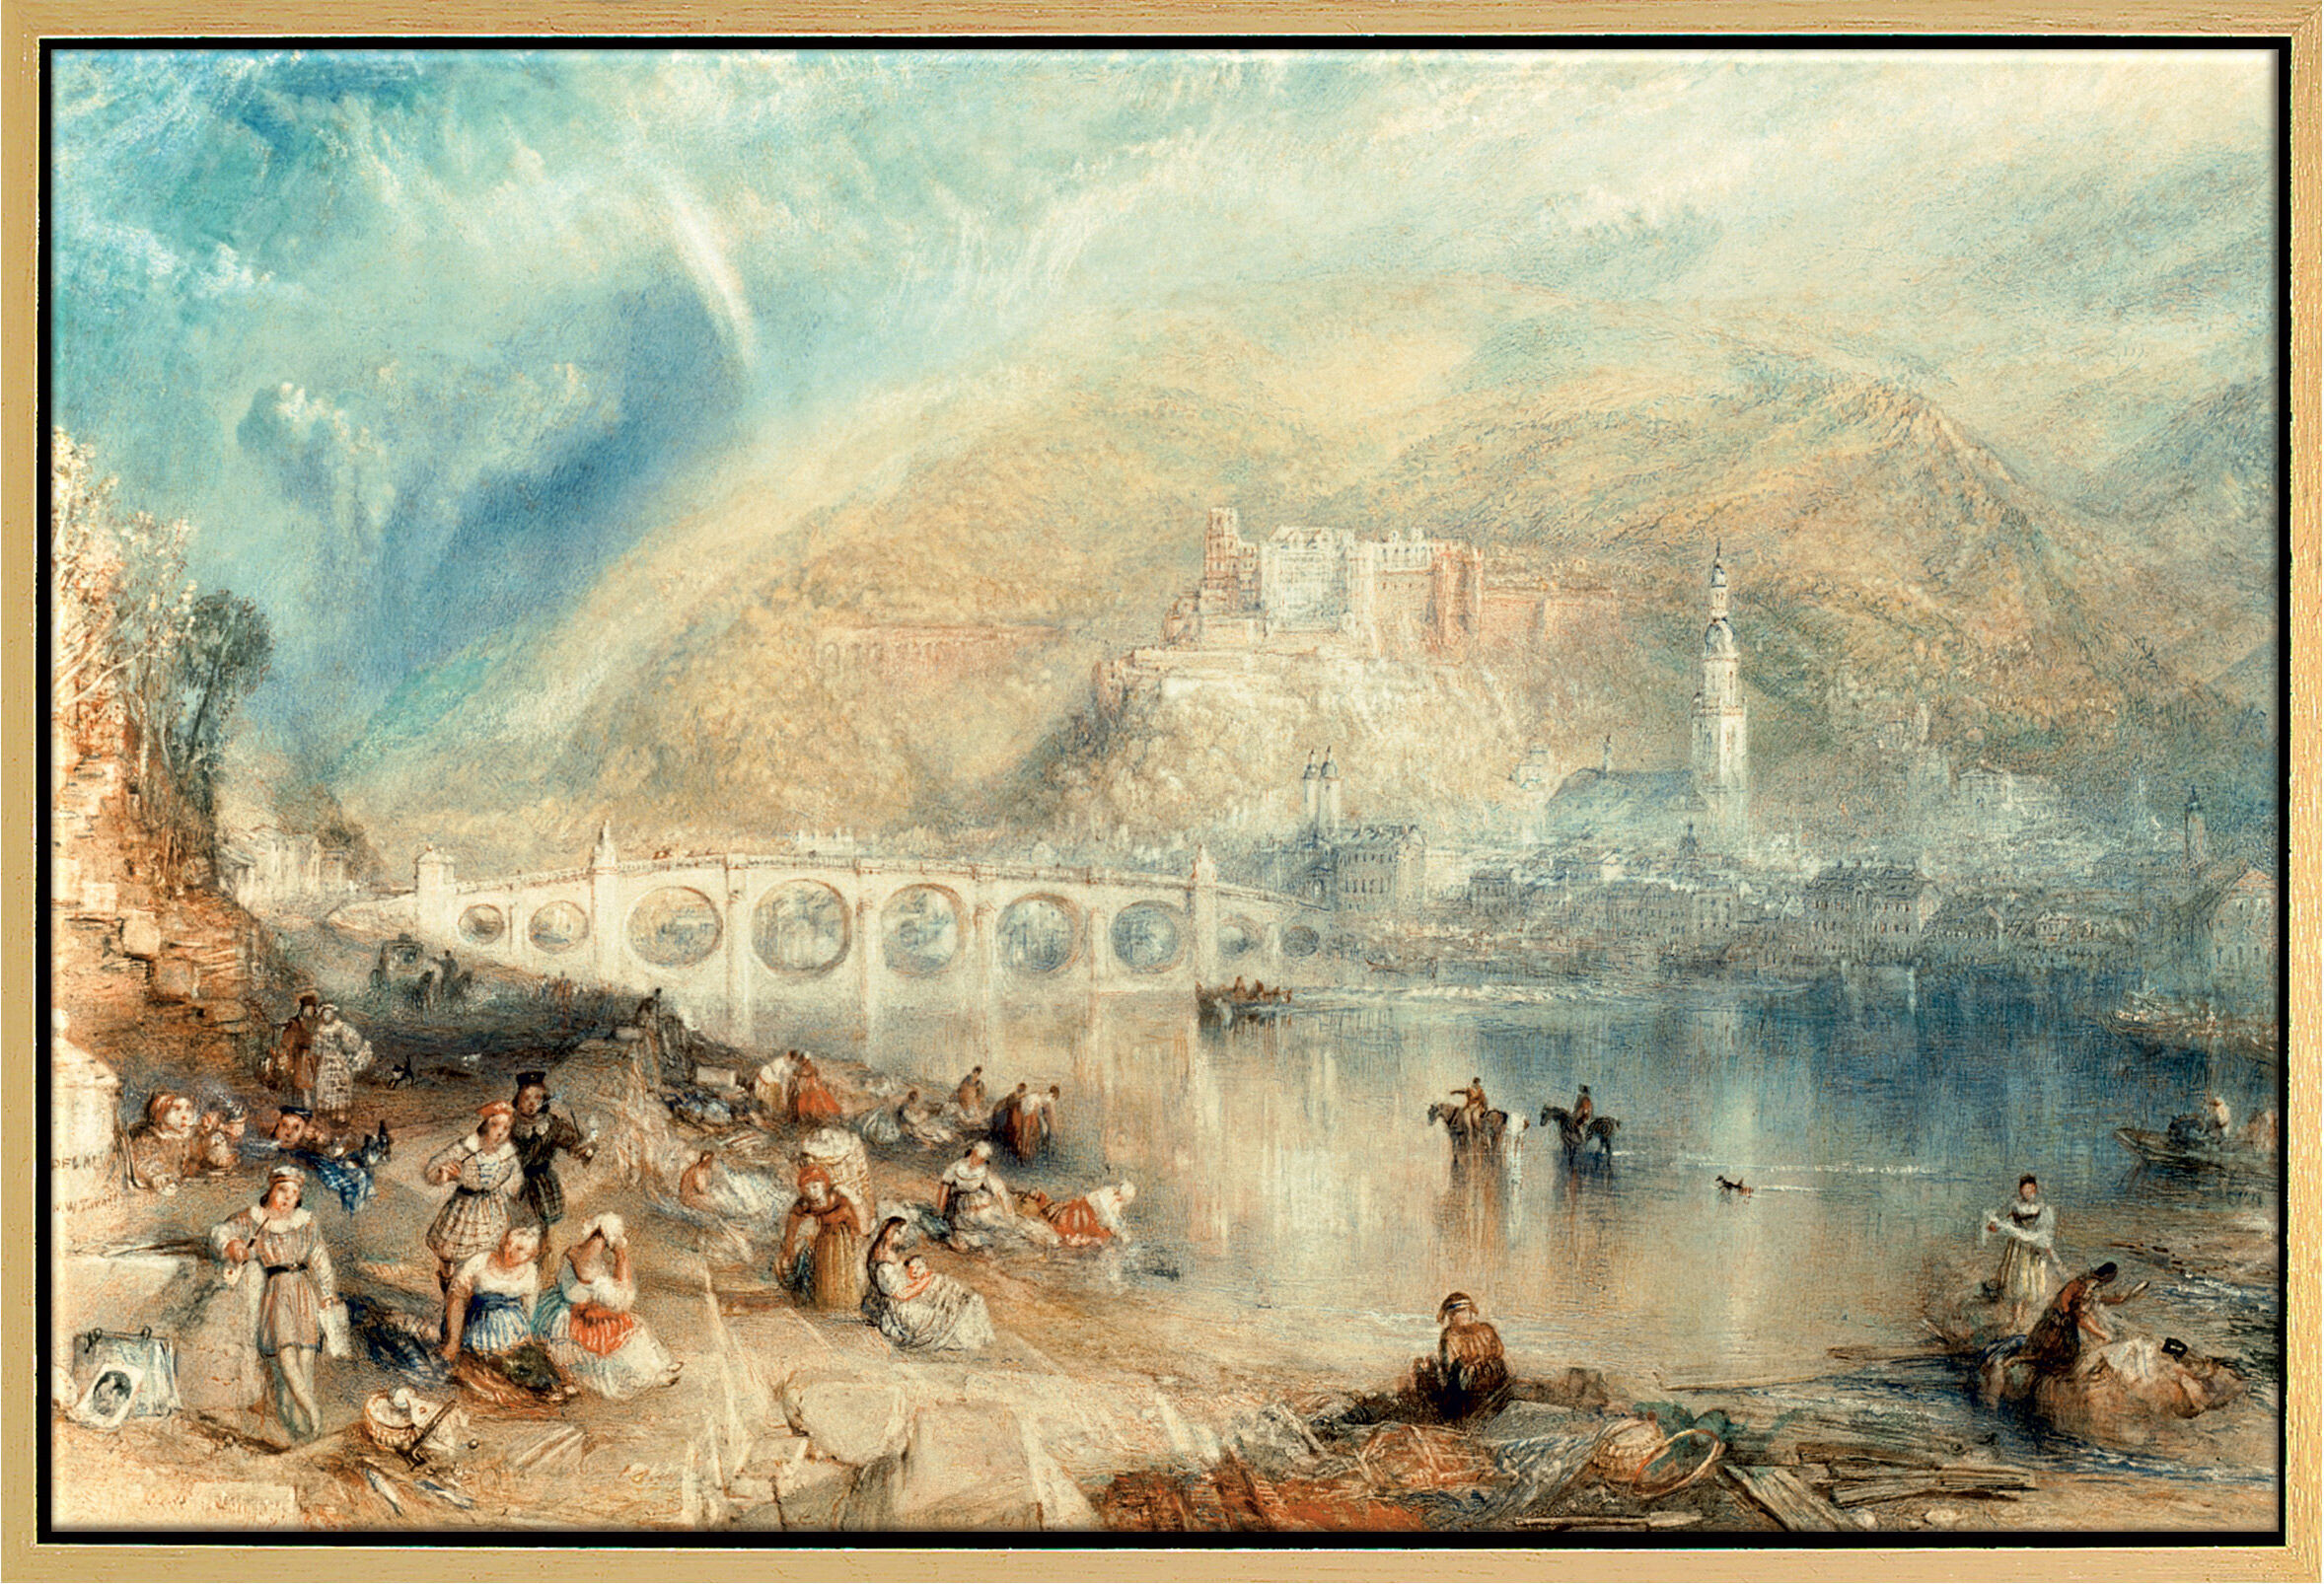 Picture "Heidelberg with a Rainbow" (c. 1841), framed by William Turner